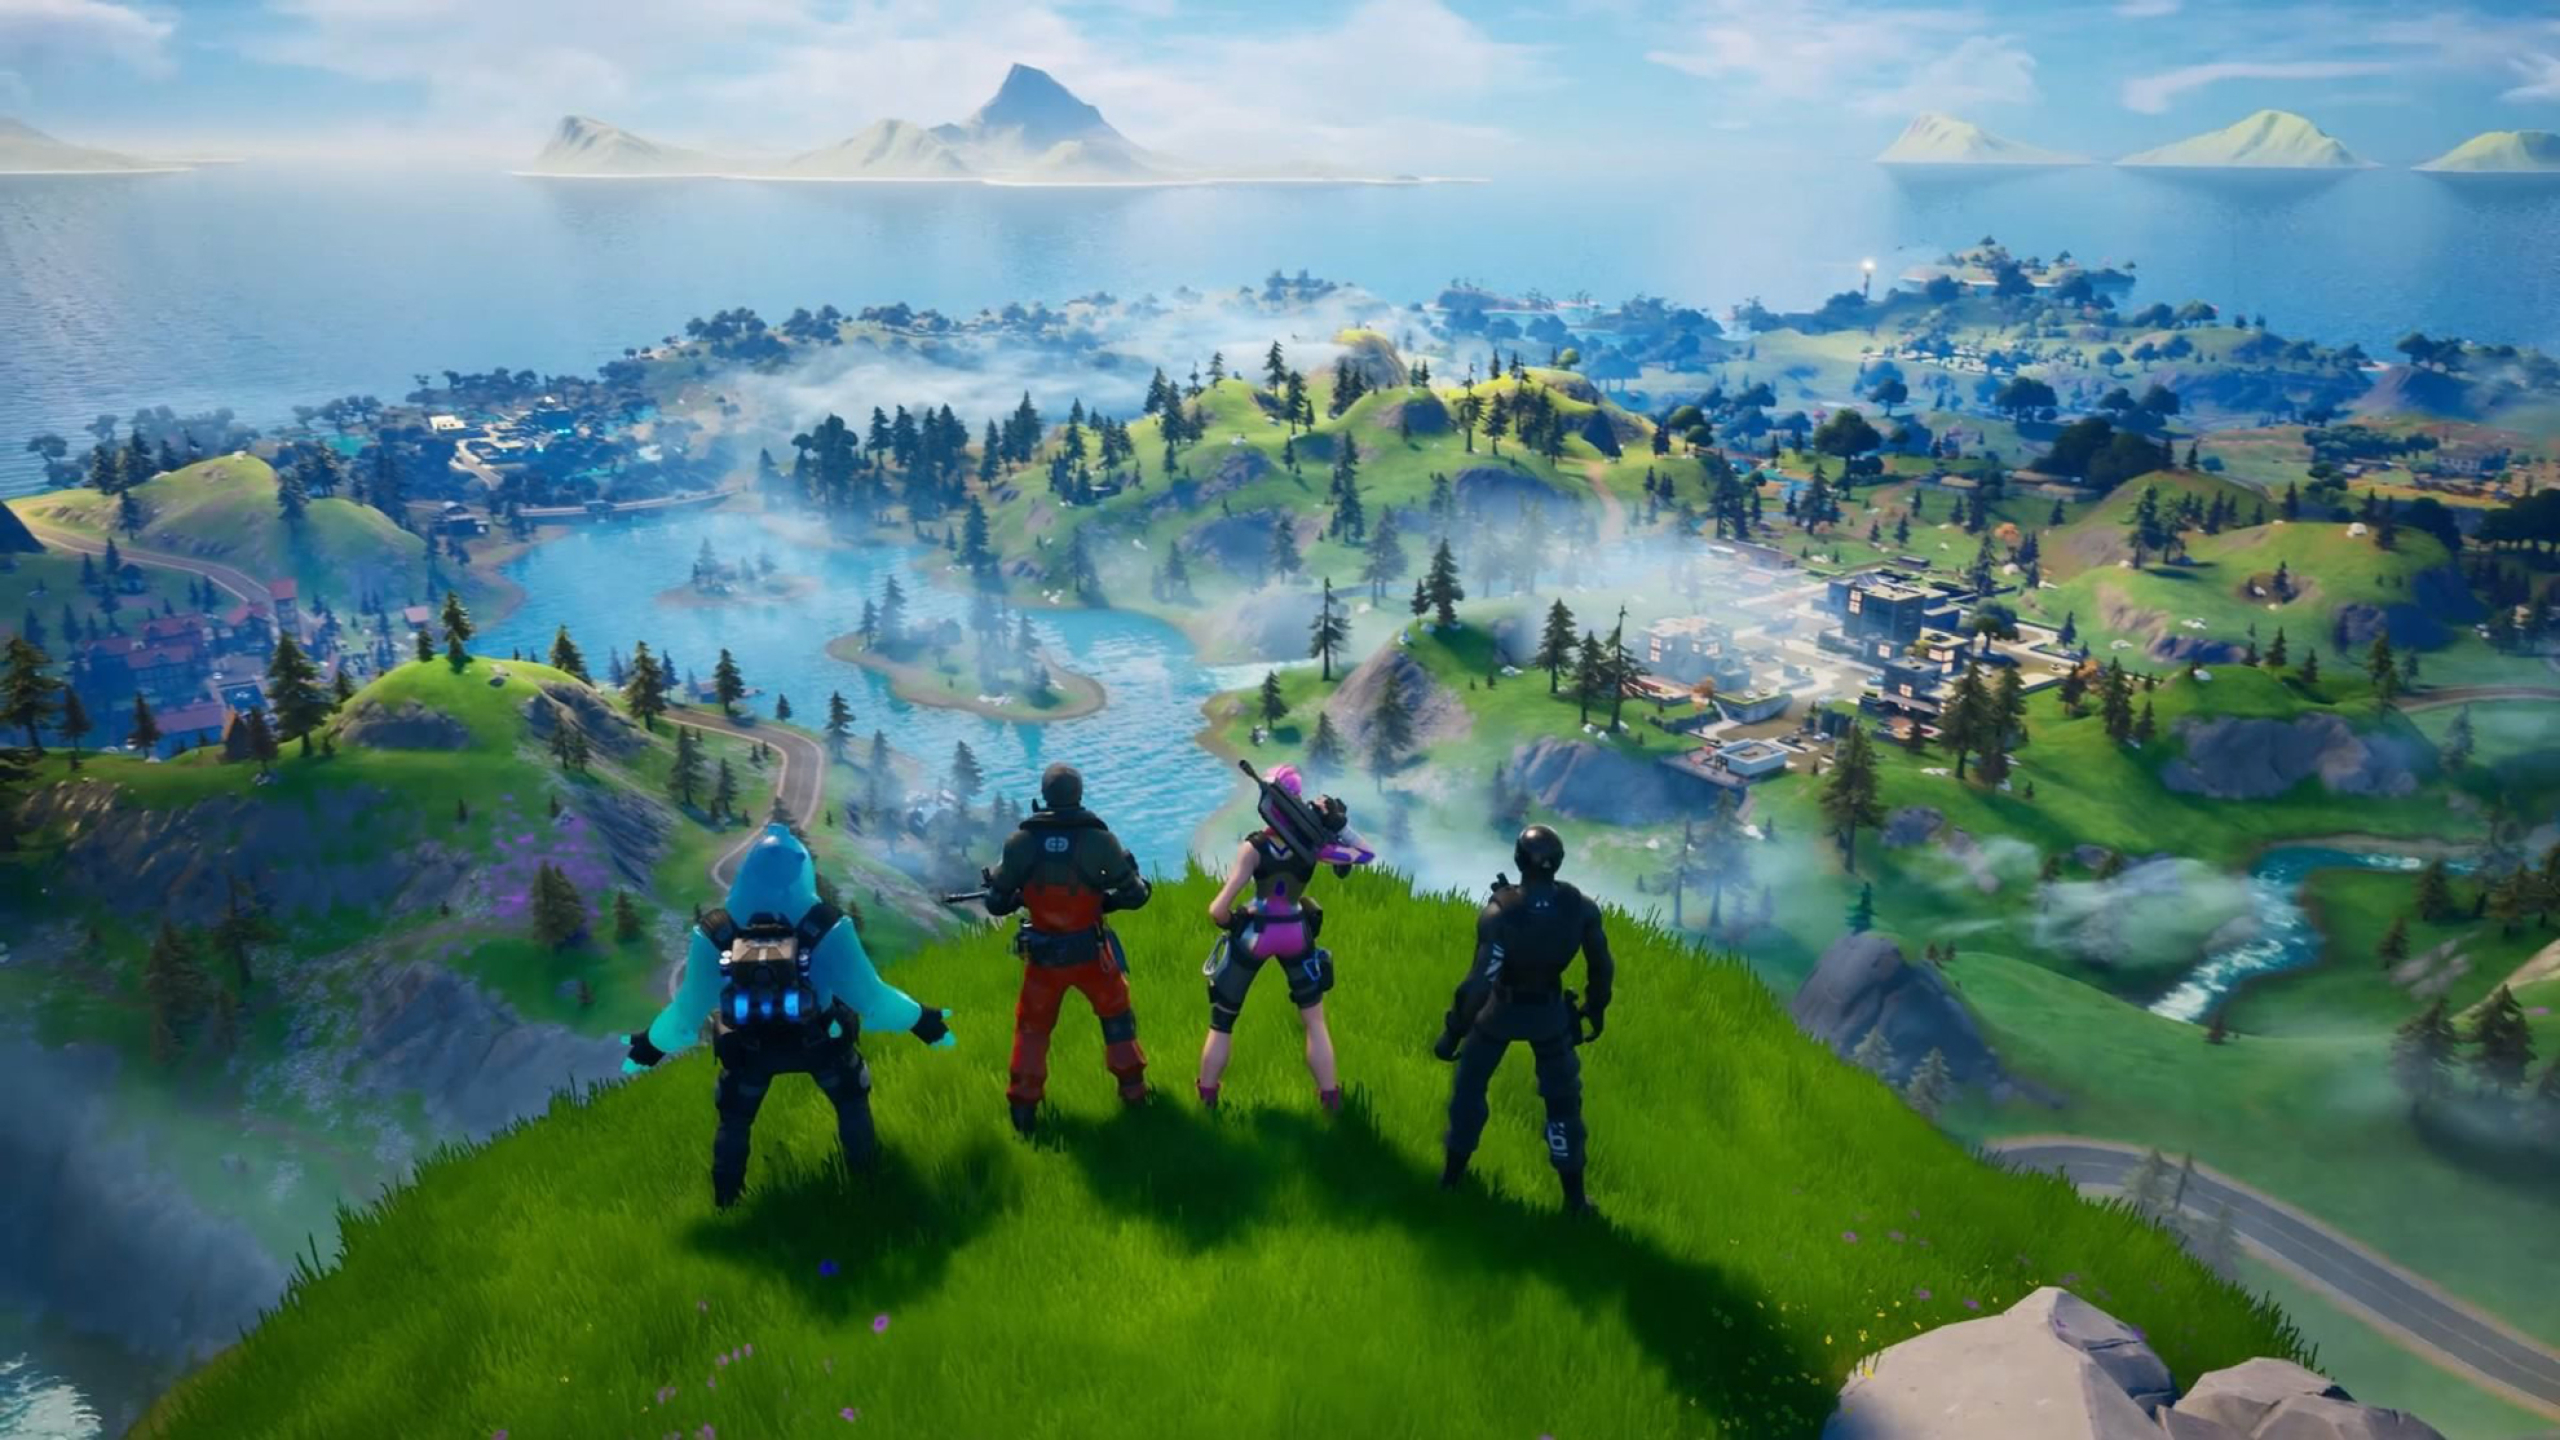 2560x1440 Fortnite Chapter 2 Game 1440P Resolution Wallpaper, HD Games